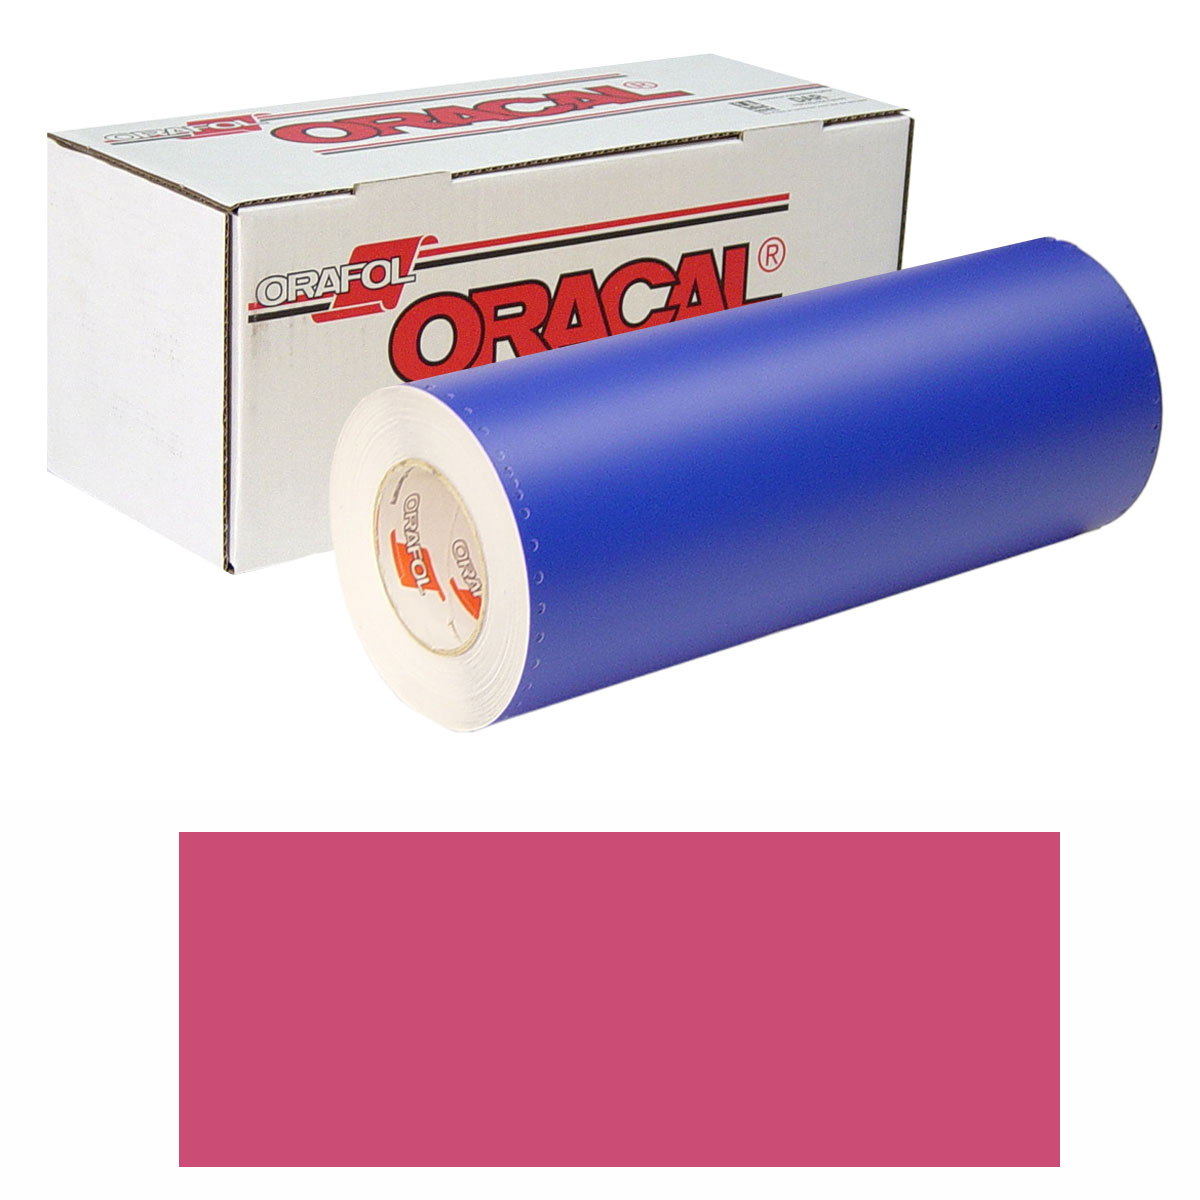 ORACAL 8300 15in X 50yd 031 Red